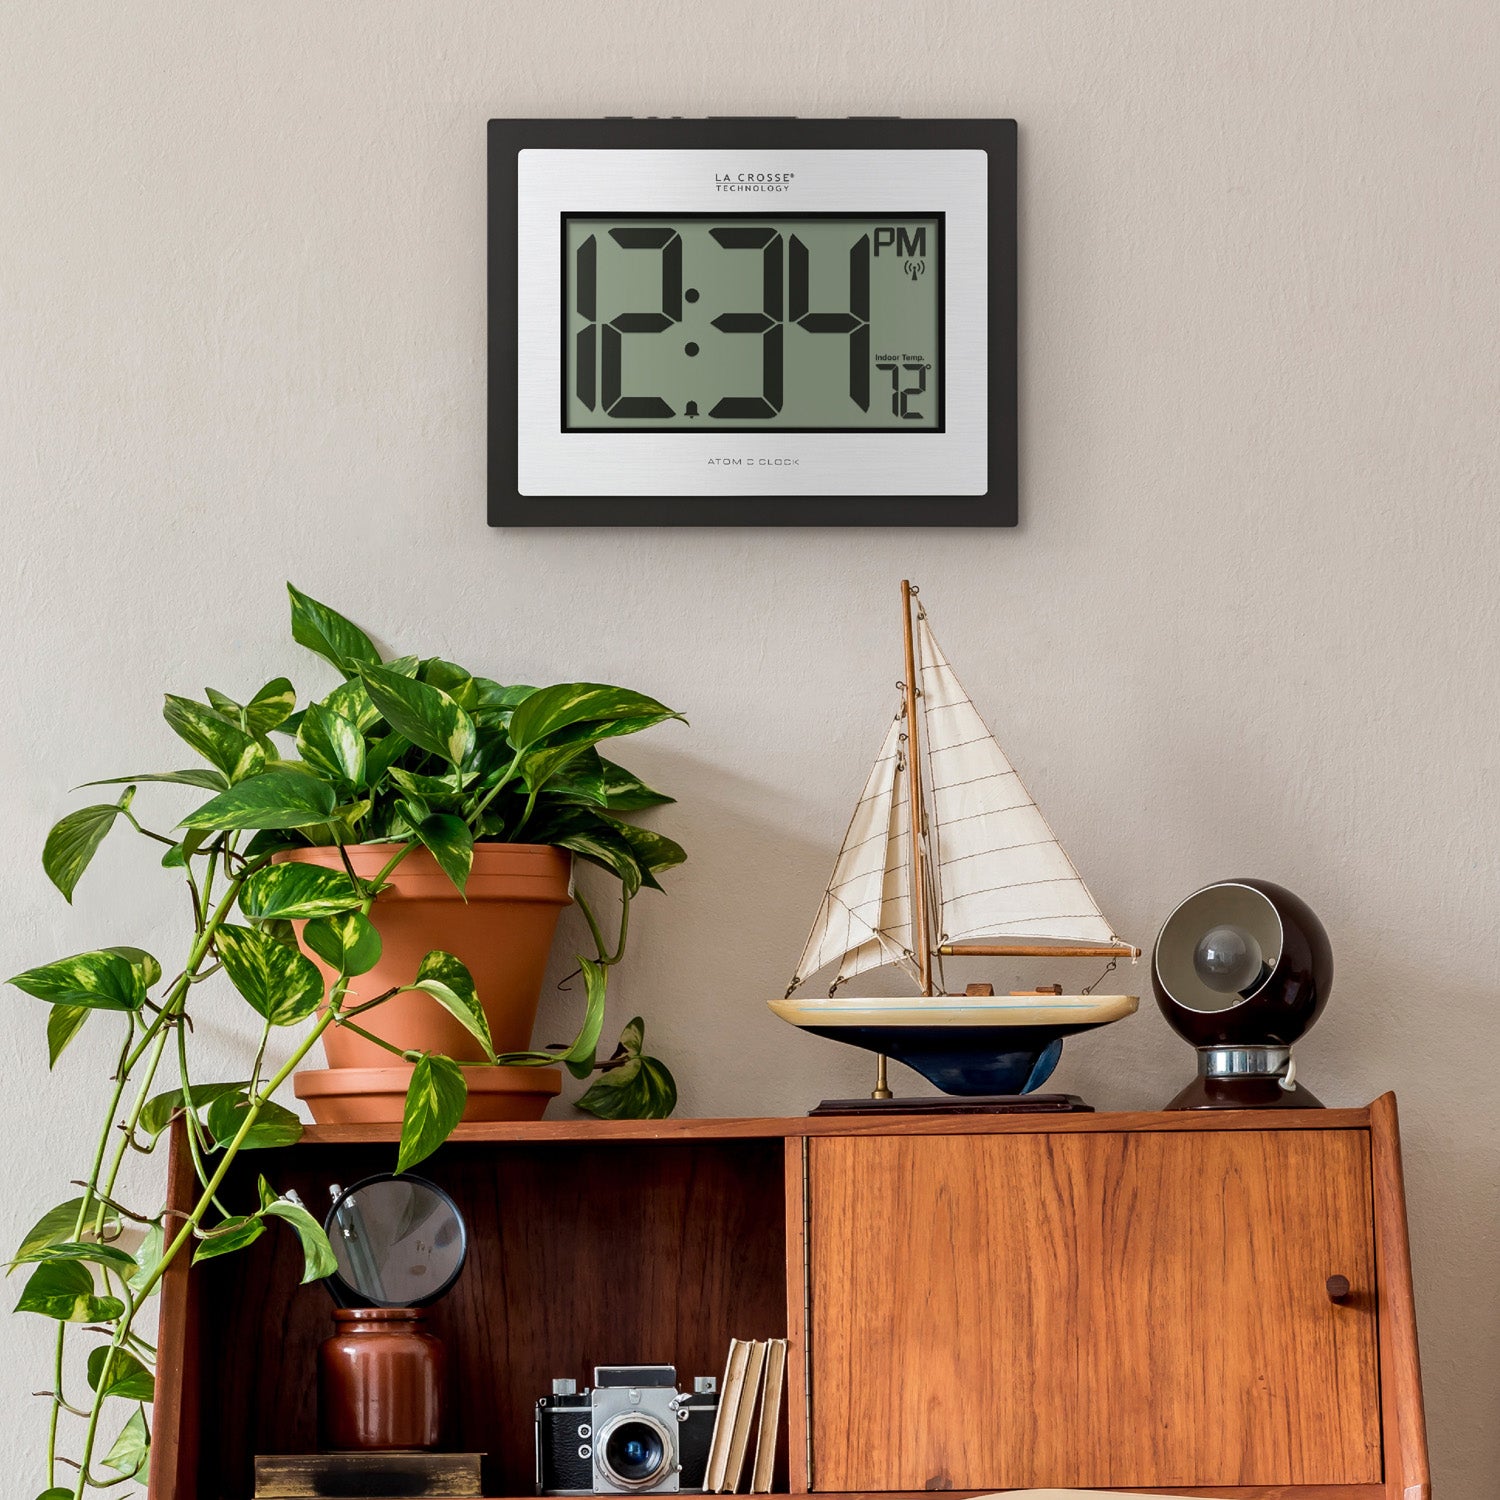 La Crosse Technology 513-113 Digital Wall Clock with Temperature & Countdown Timer